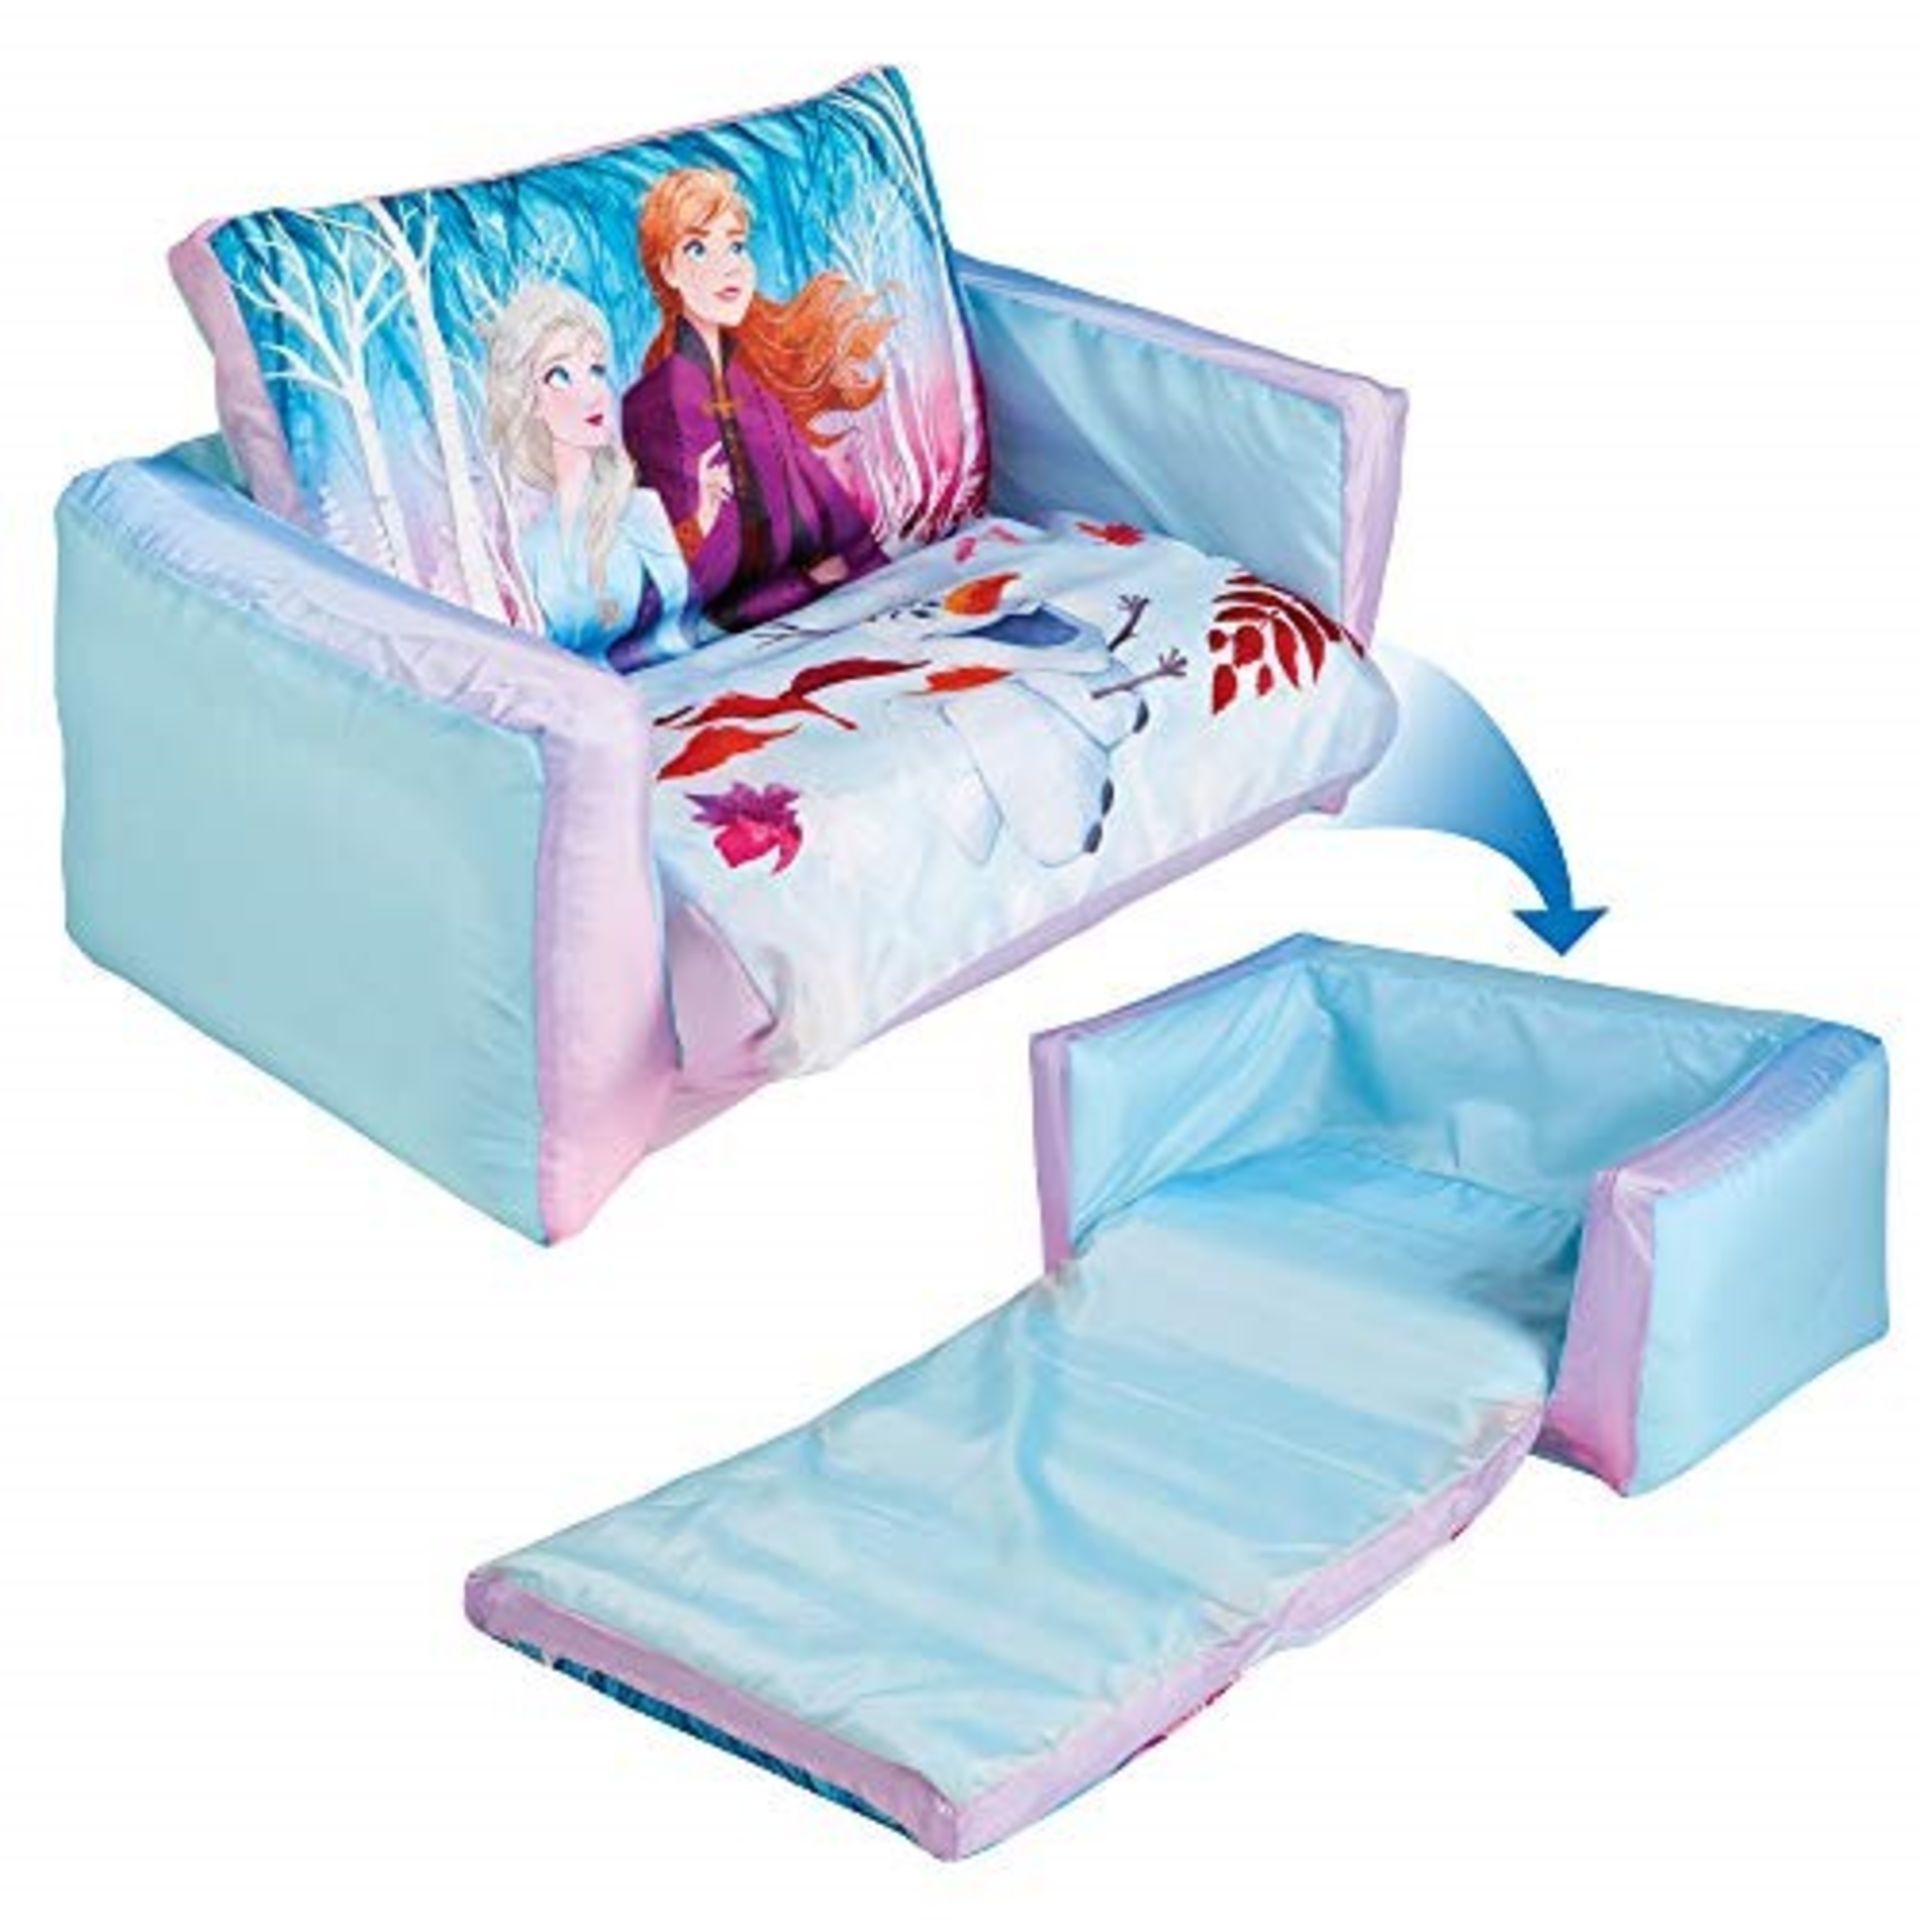 Disney Frozen Flip Out Mini 2 in 1 Kids Inflatable Sofa and Lounger, Blue